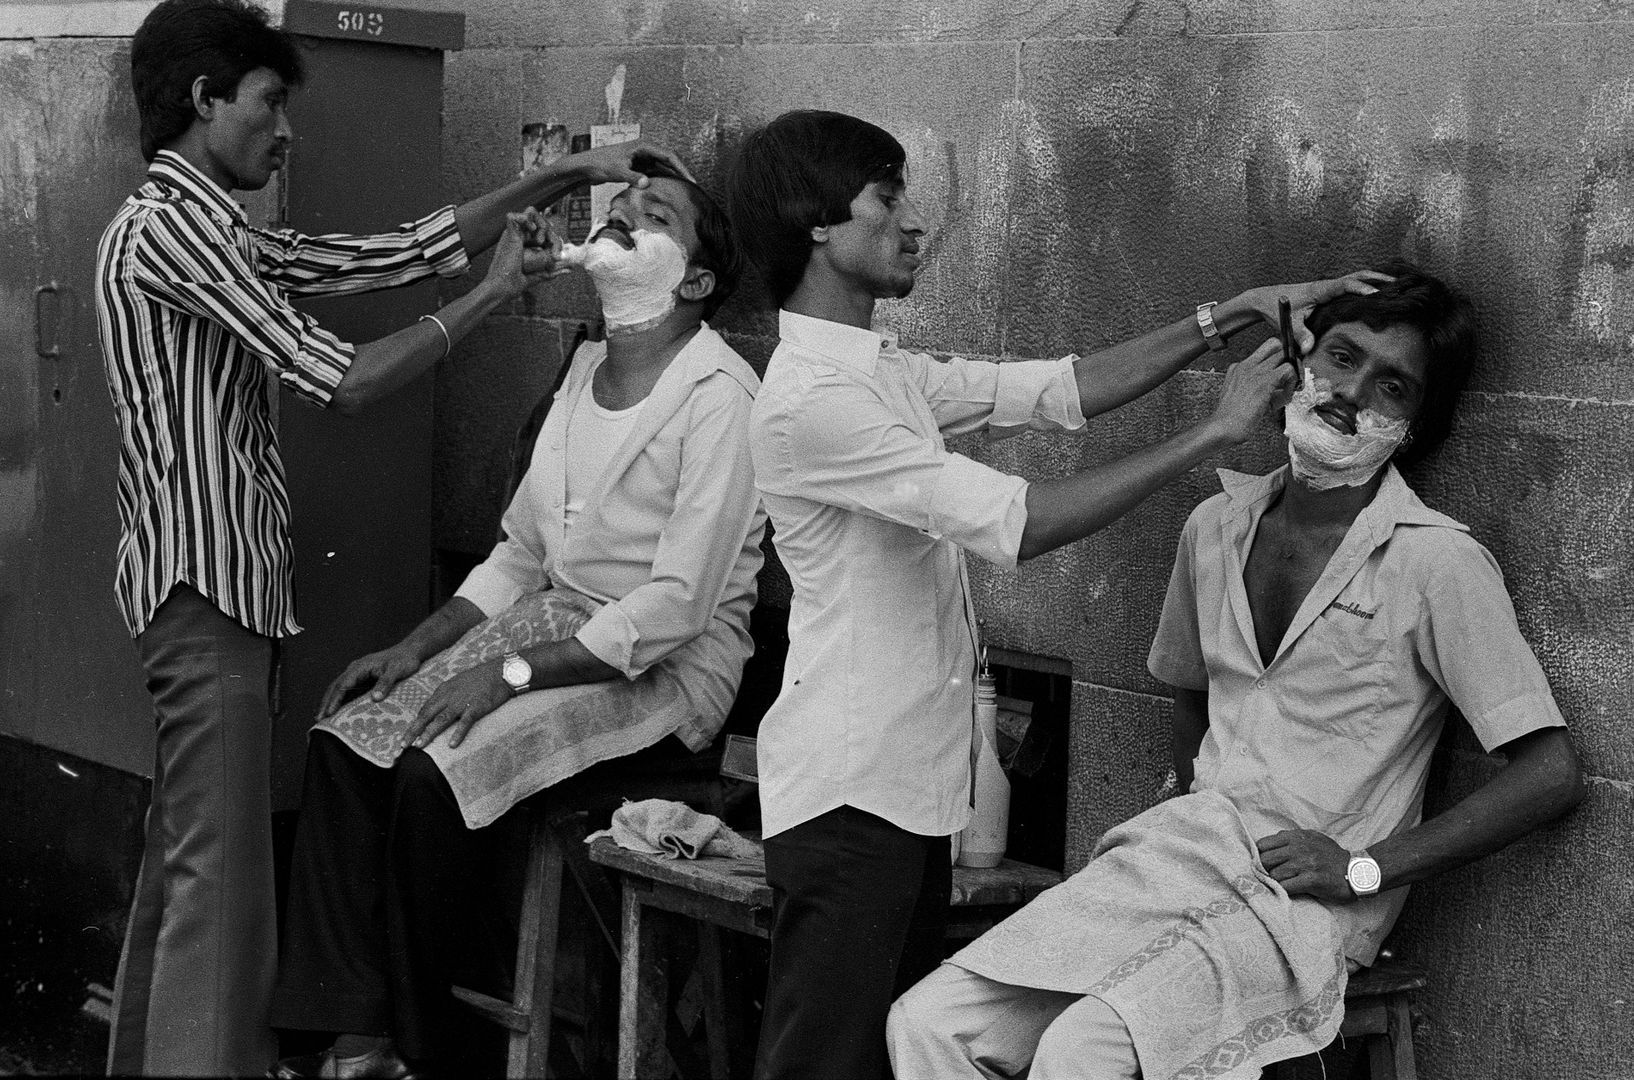 Sex federer7:Street Barber. Bombay, India, 1986Photo pictures